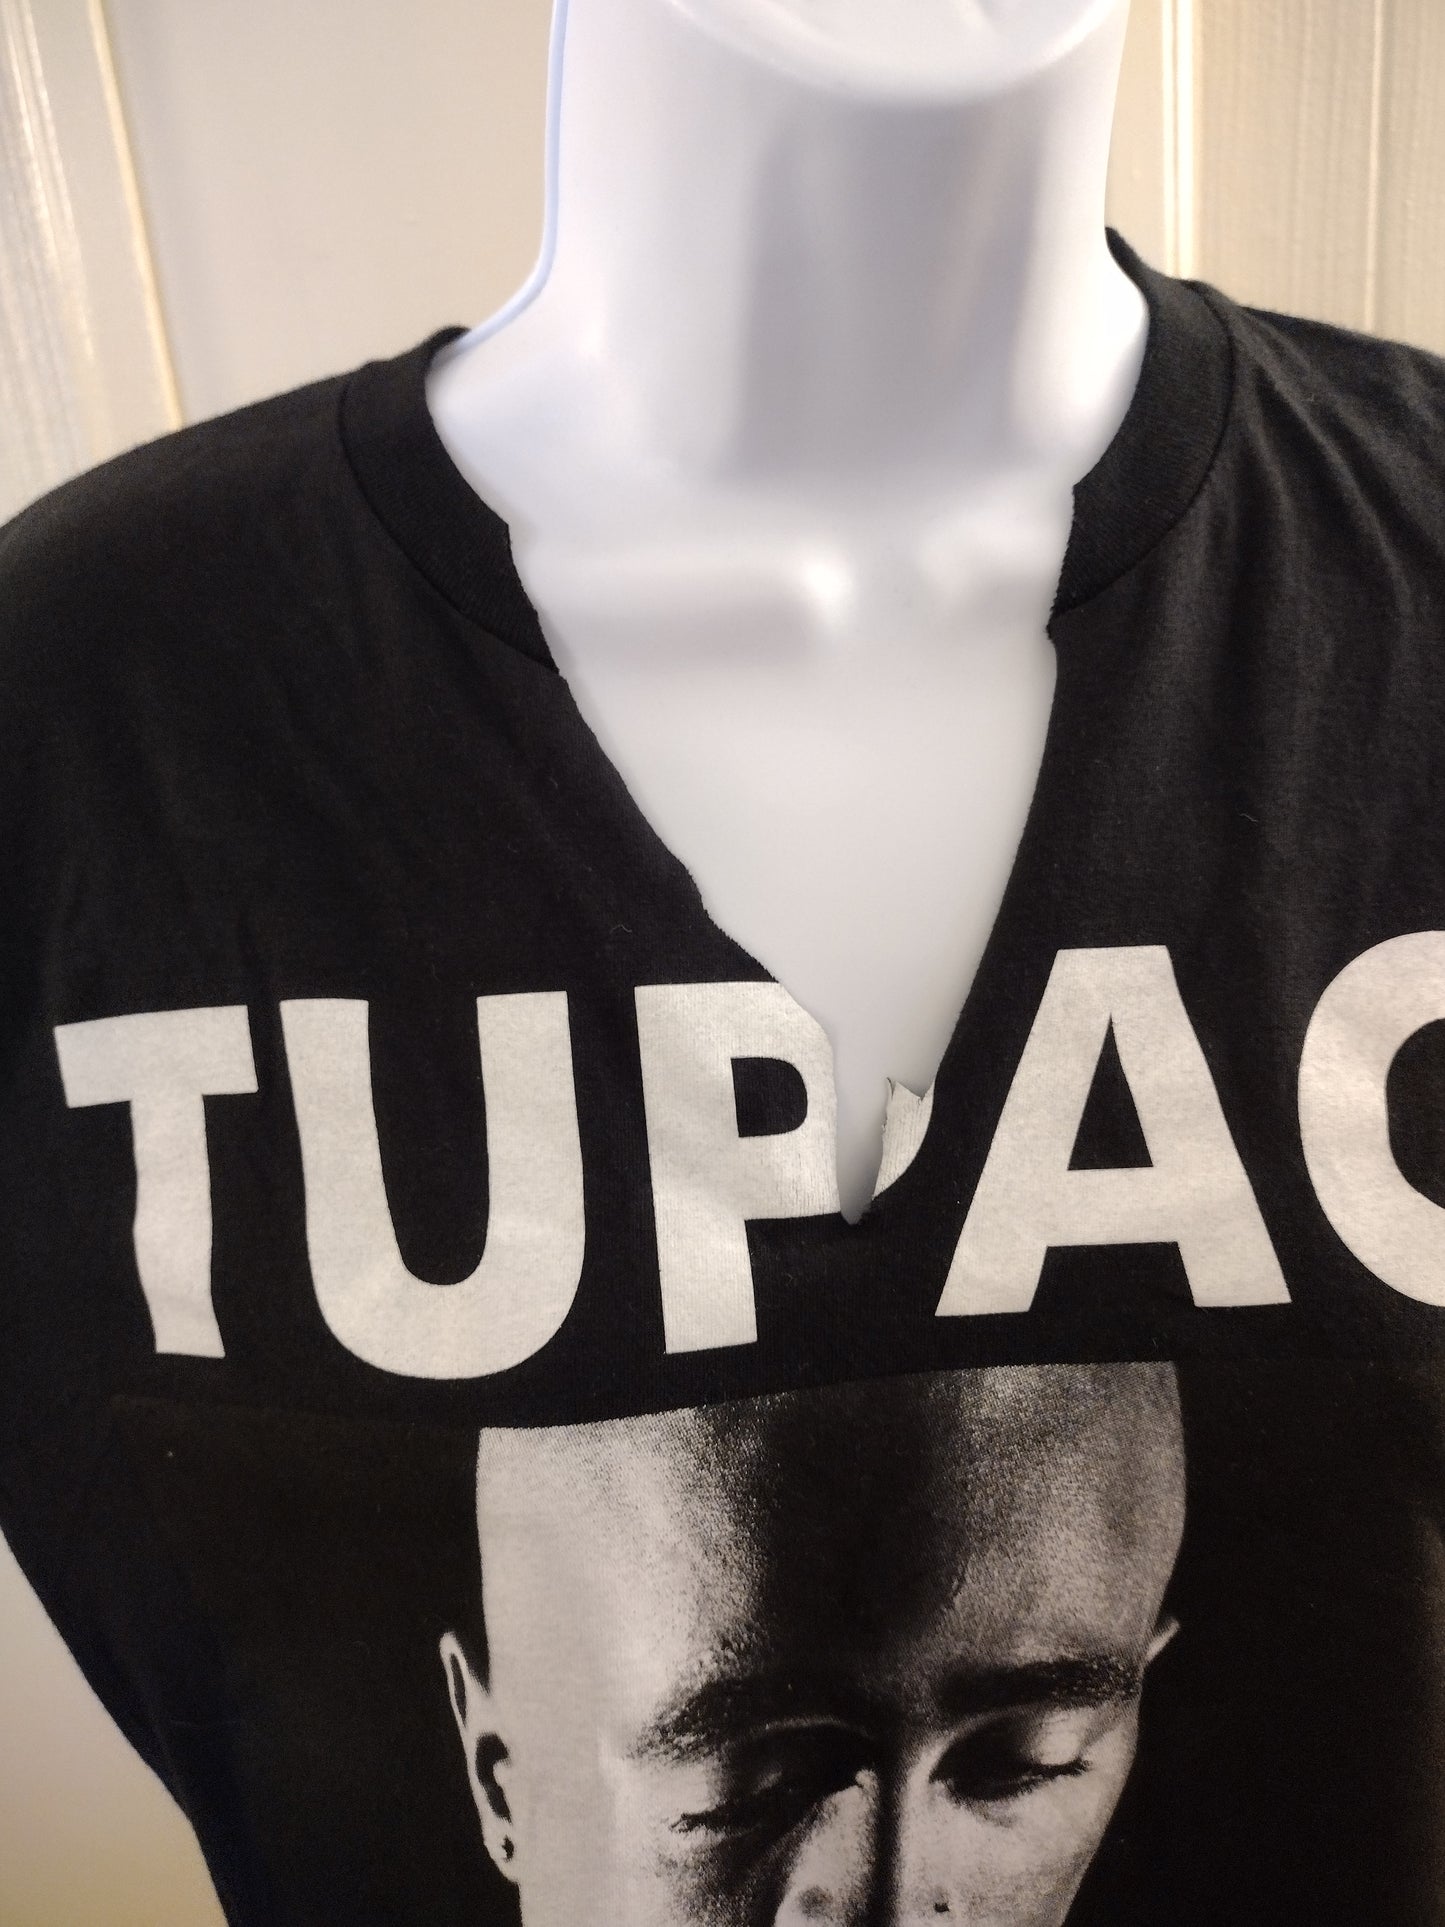 2 Pac Trust Nobody Adult T Shirt   Adult Size - Small  100% Cotton  Color Way : Black / White  Cut Off